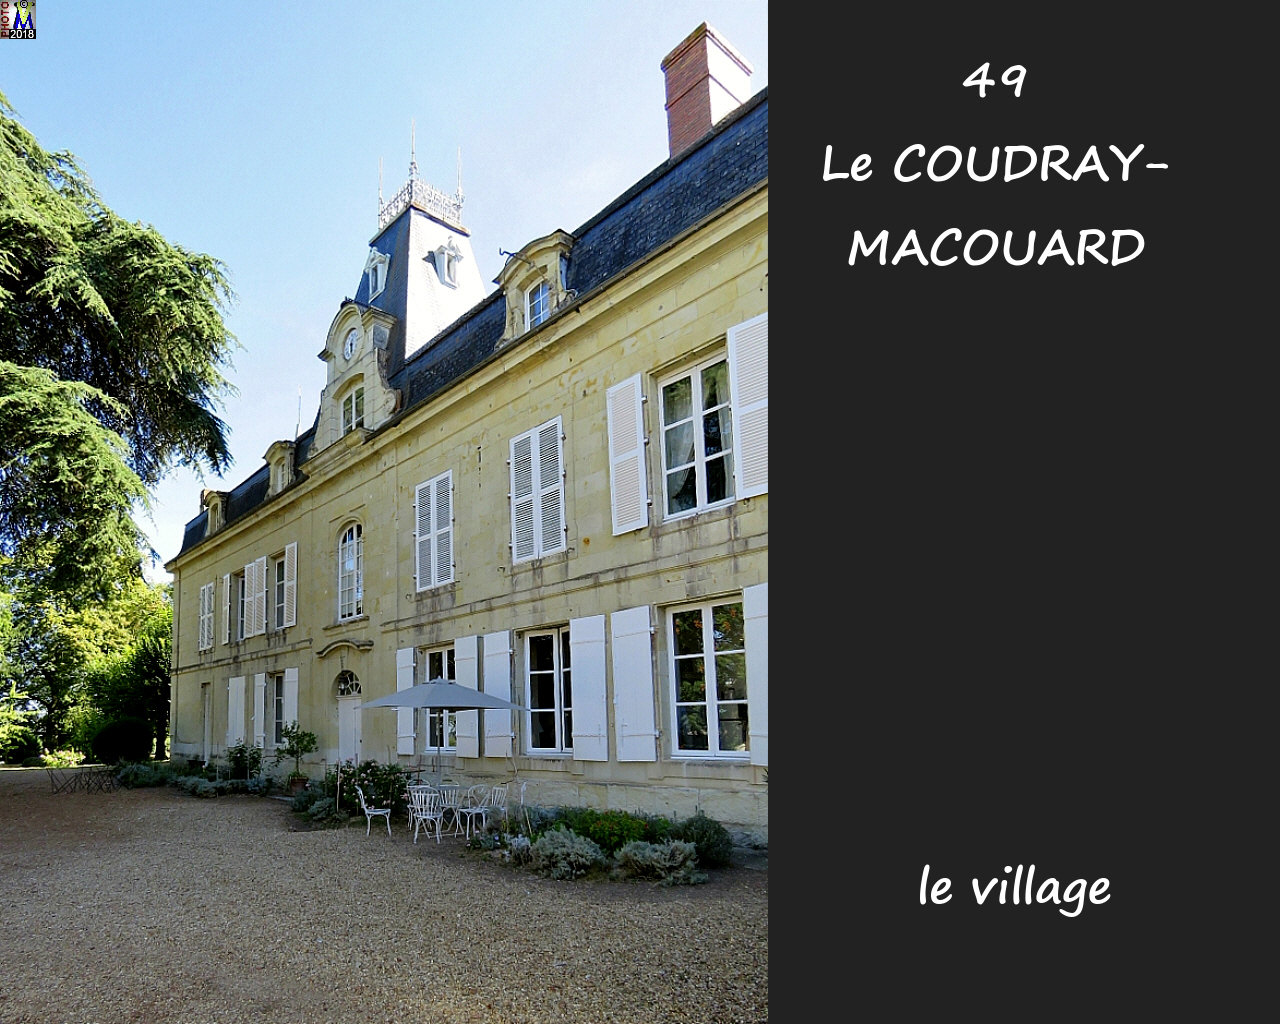 49COUDRAY-MACOUARD_village_1026.jpg